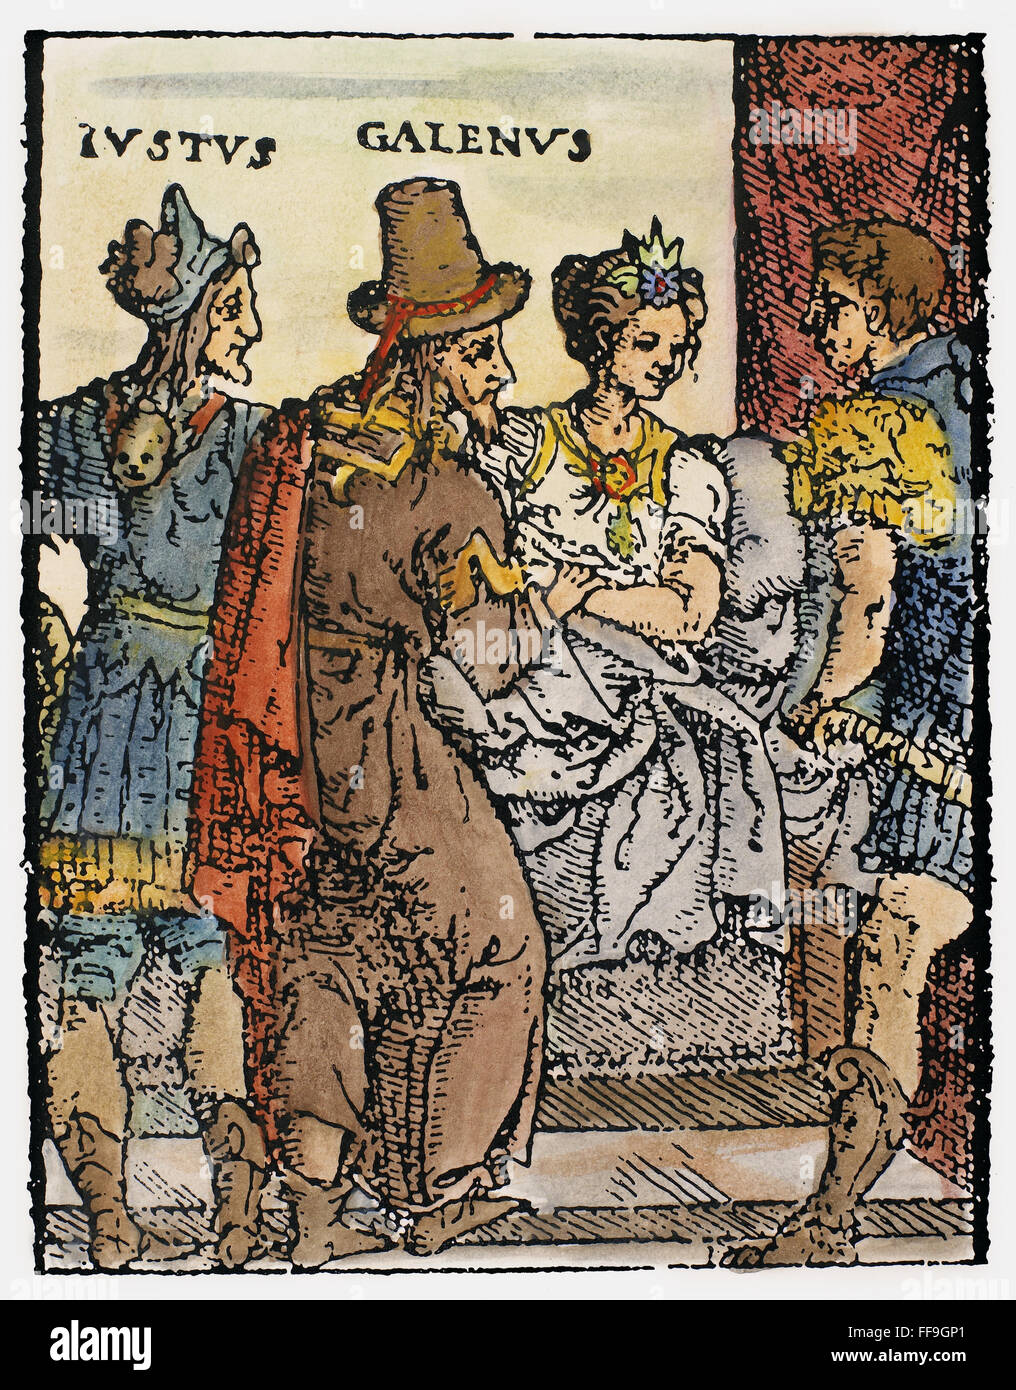 GALEN (129-c200 A.D.). /nGreek physician. Galen determining that a lady's illness is due to unrequited love rather than physical causes. Woodcut from a 1586 edition of Galen's works. Stock Photo